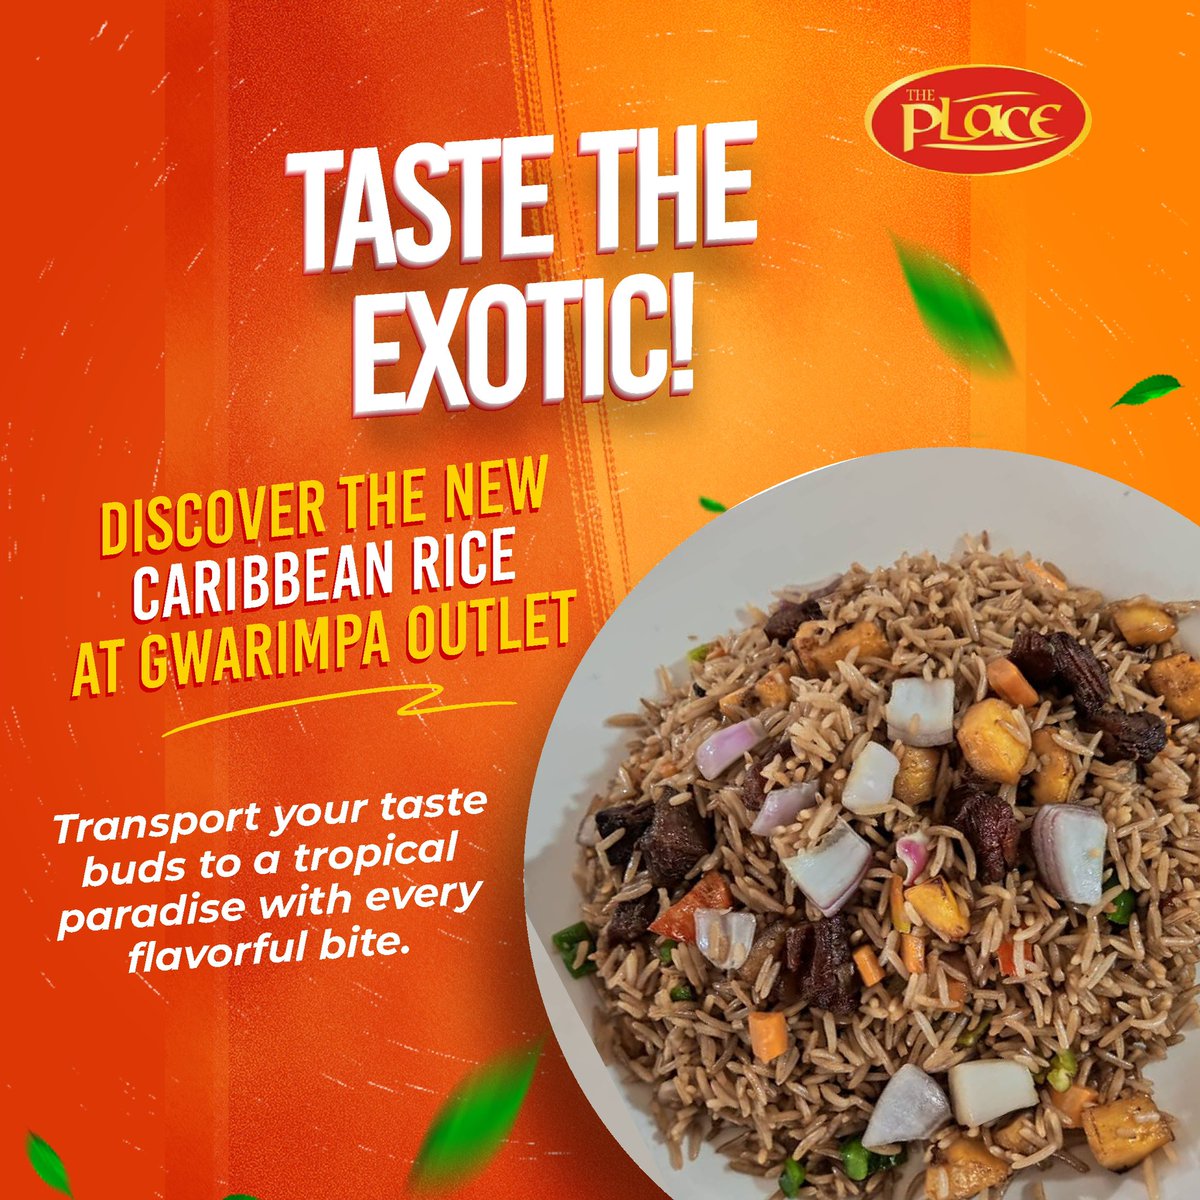 Indulge in the exotic flavors of our all-new Caribbean Rice! 🌴🍚

Visit our Gwarimpa outlet and treat your taste buds to a journey through tropical paradise with each delectable bite. 

#CaribbeanCuisine #TasteTheExotic #FoodAdventure #FlavorfulBites #GwarimpaEats #theplace